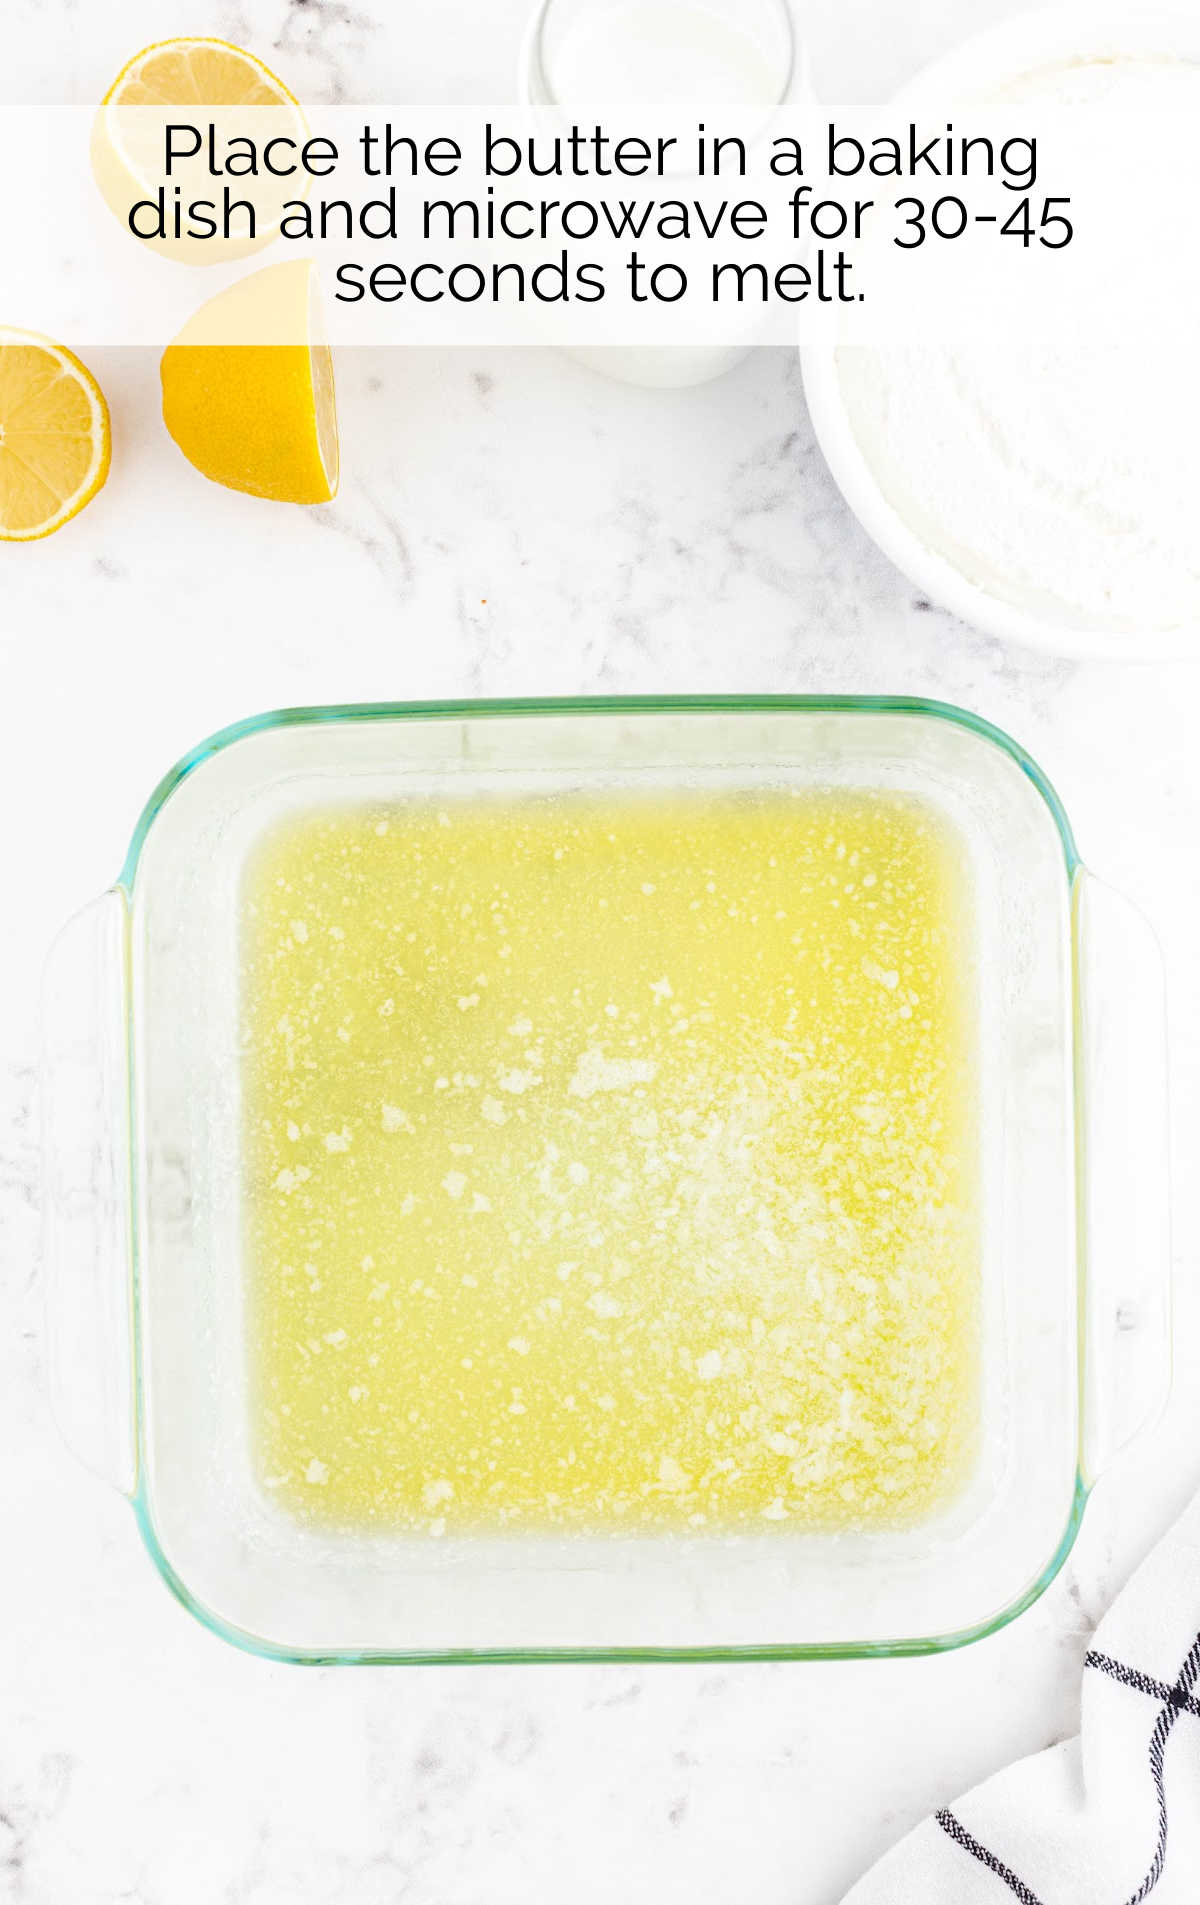 melted butter placed in a baking dish